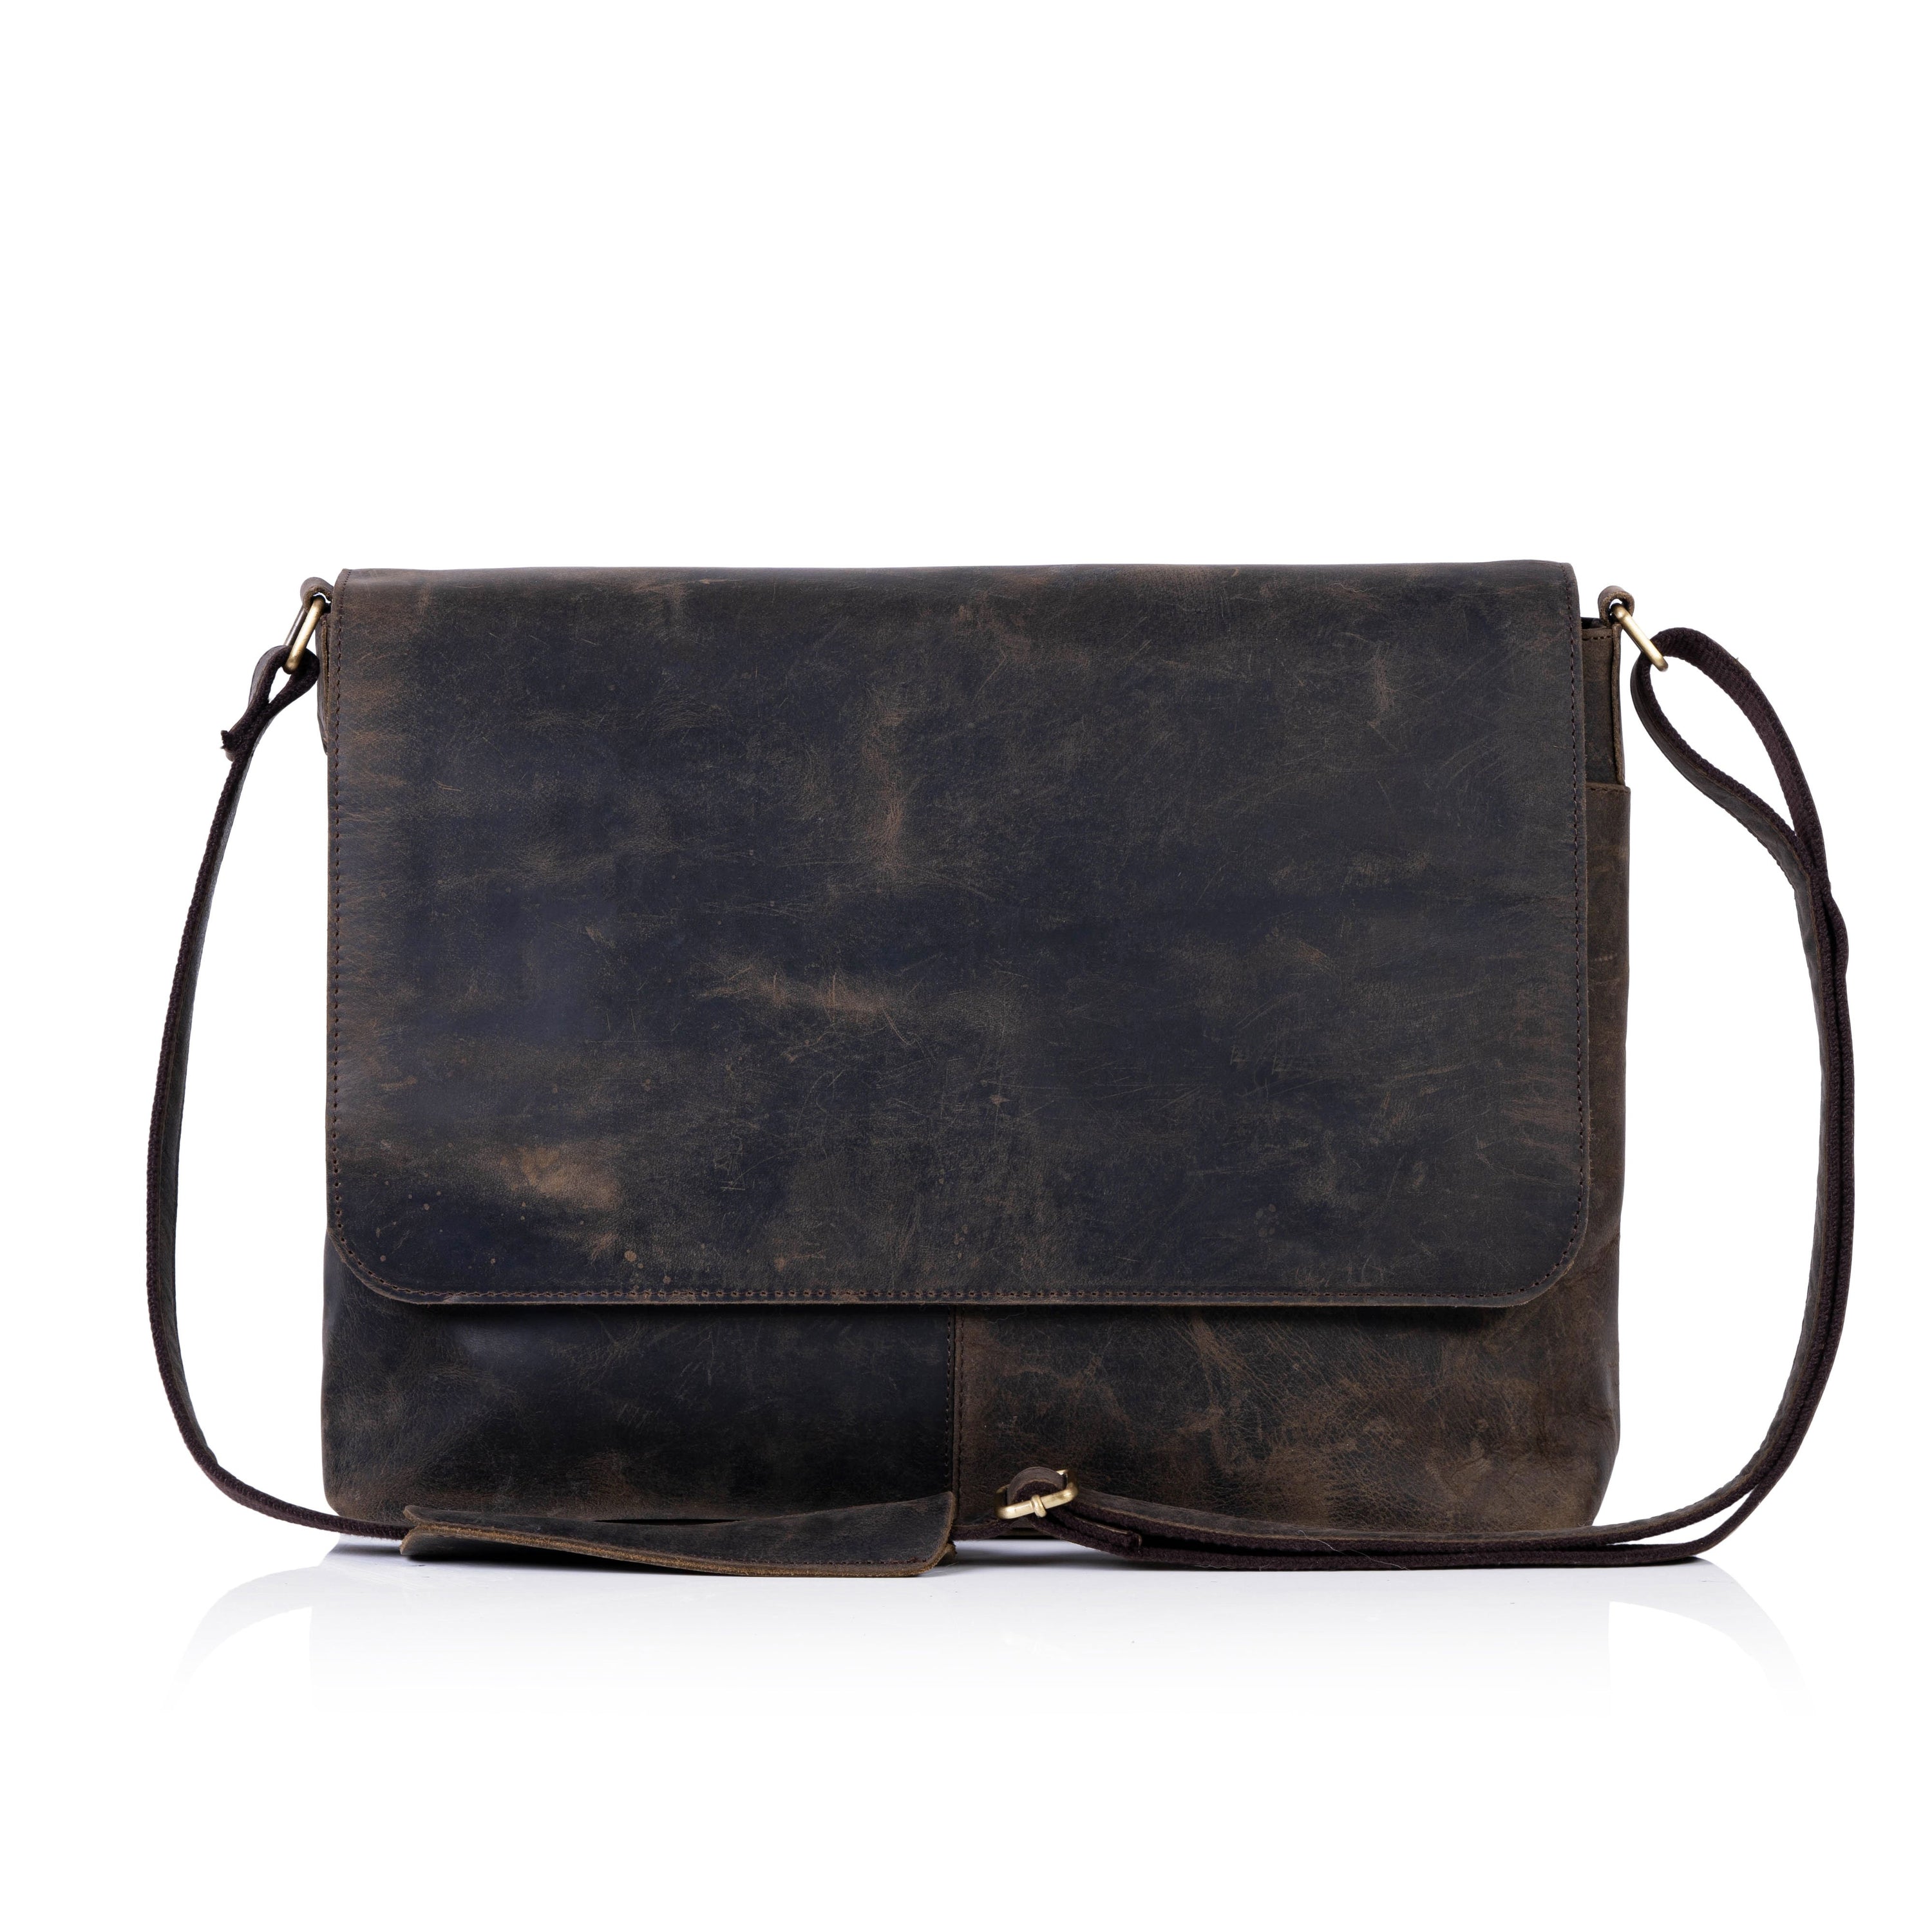 Stylish Men's Crossbody And Messenger Bags Perfect For Women